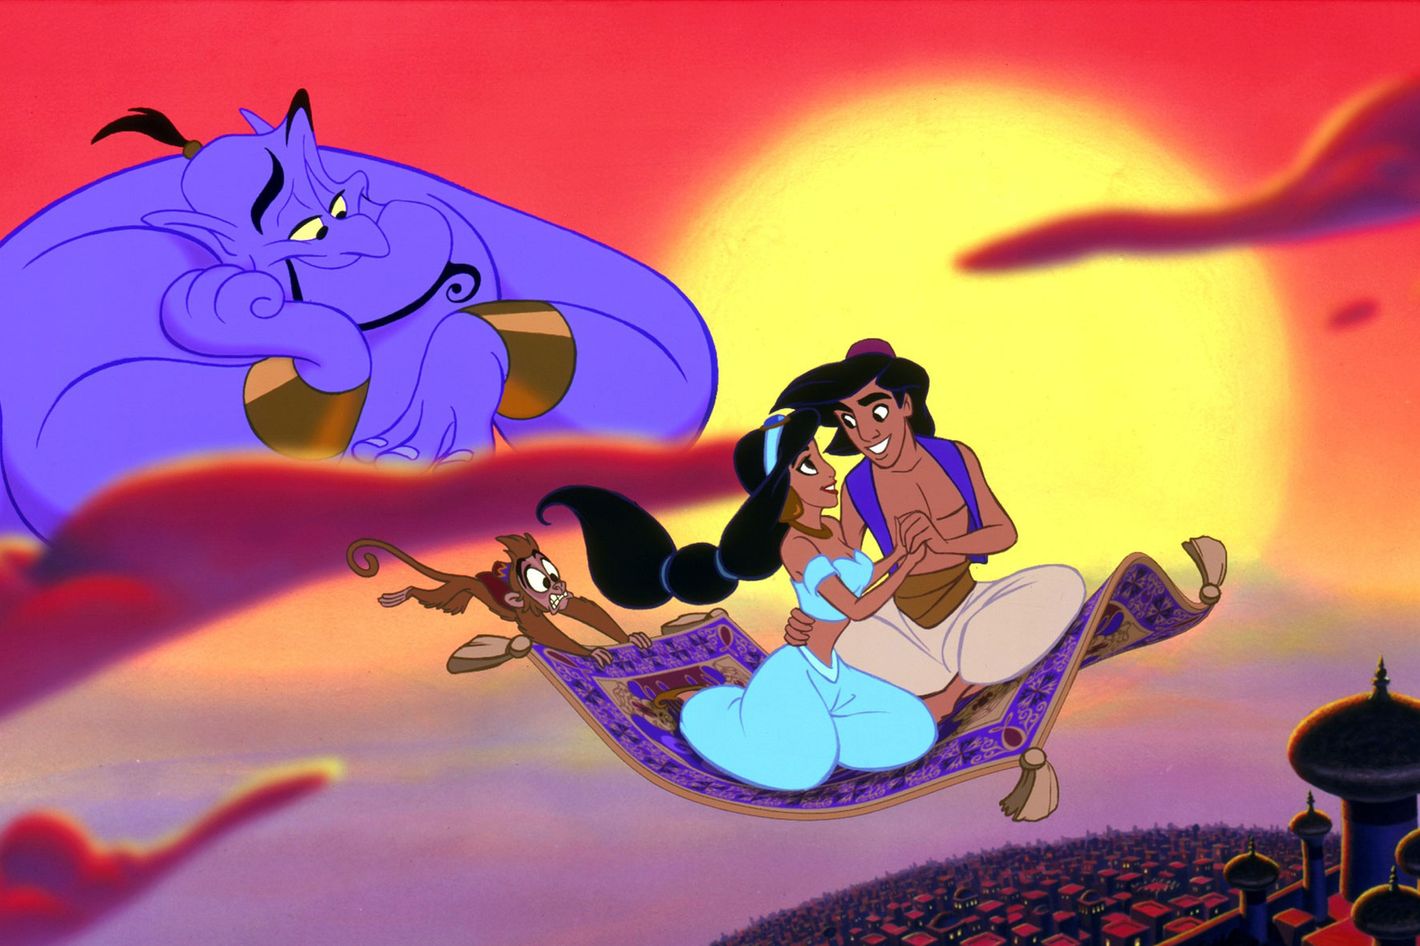 Disney finally gets the 'updated' princesses right with Aladdin's